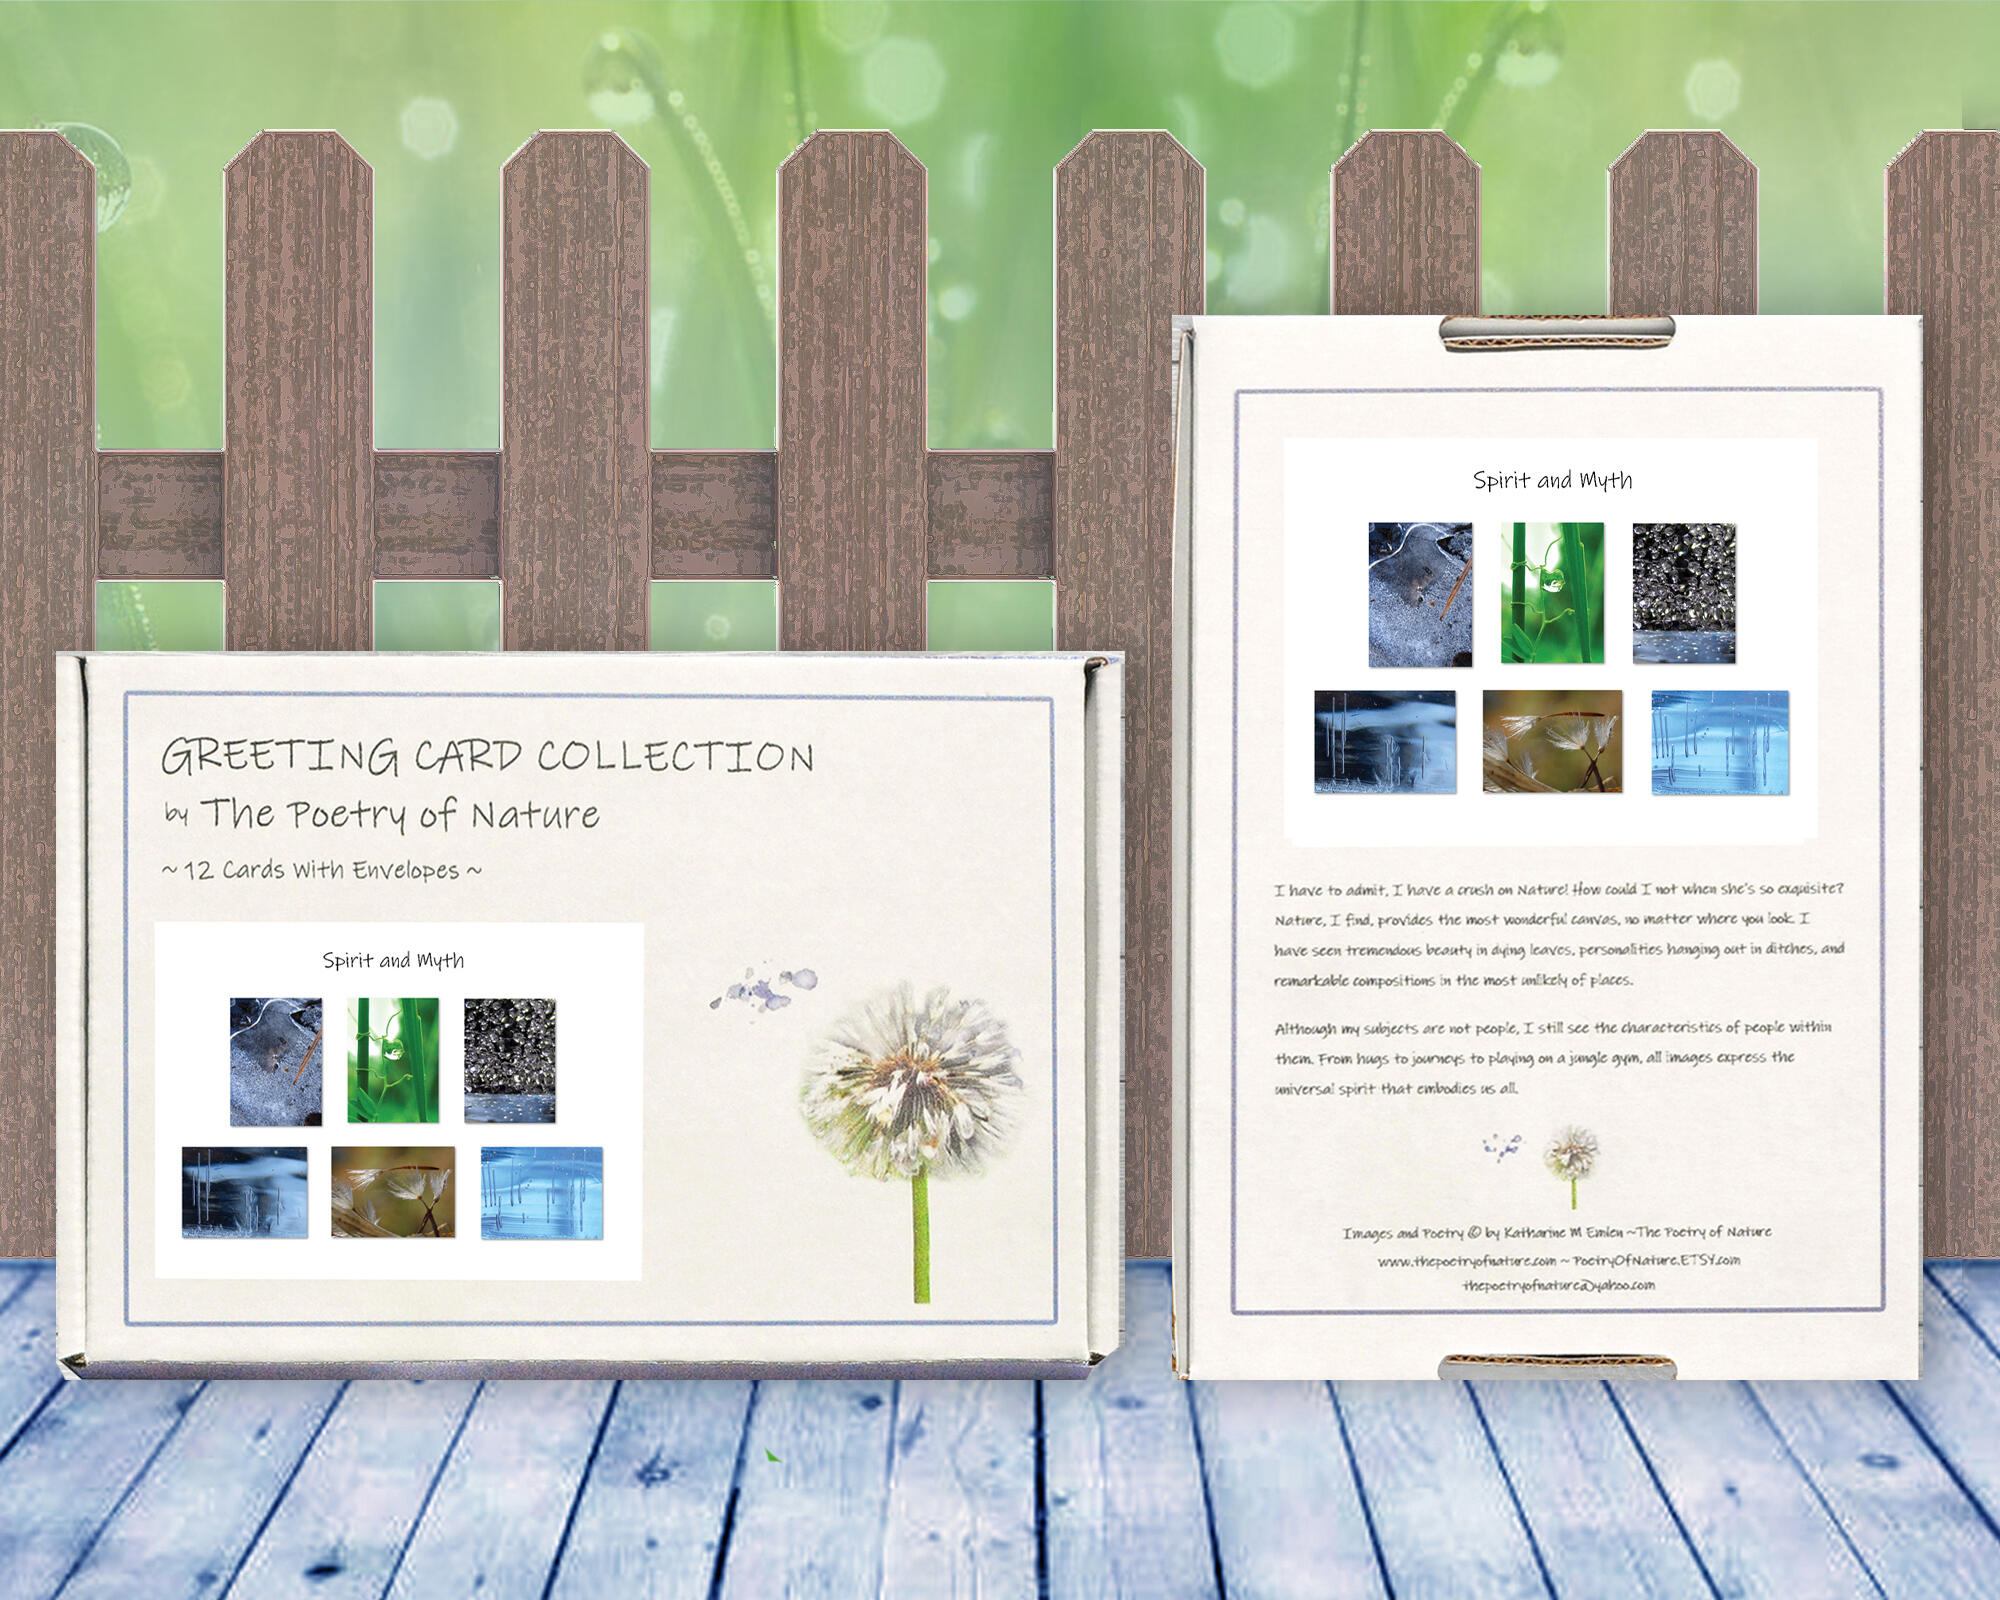 SPirit and Myth - Greeting Card Collectionby The Poetry of Nature